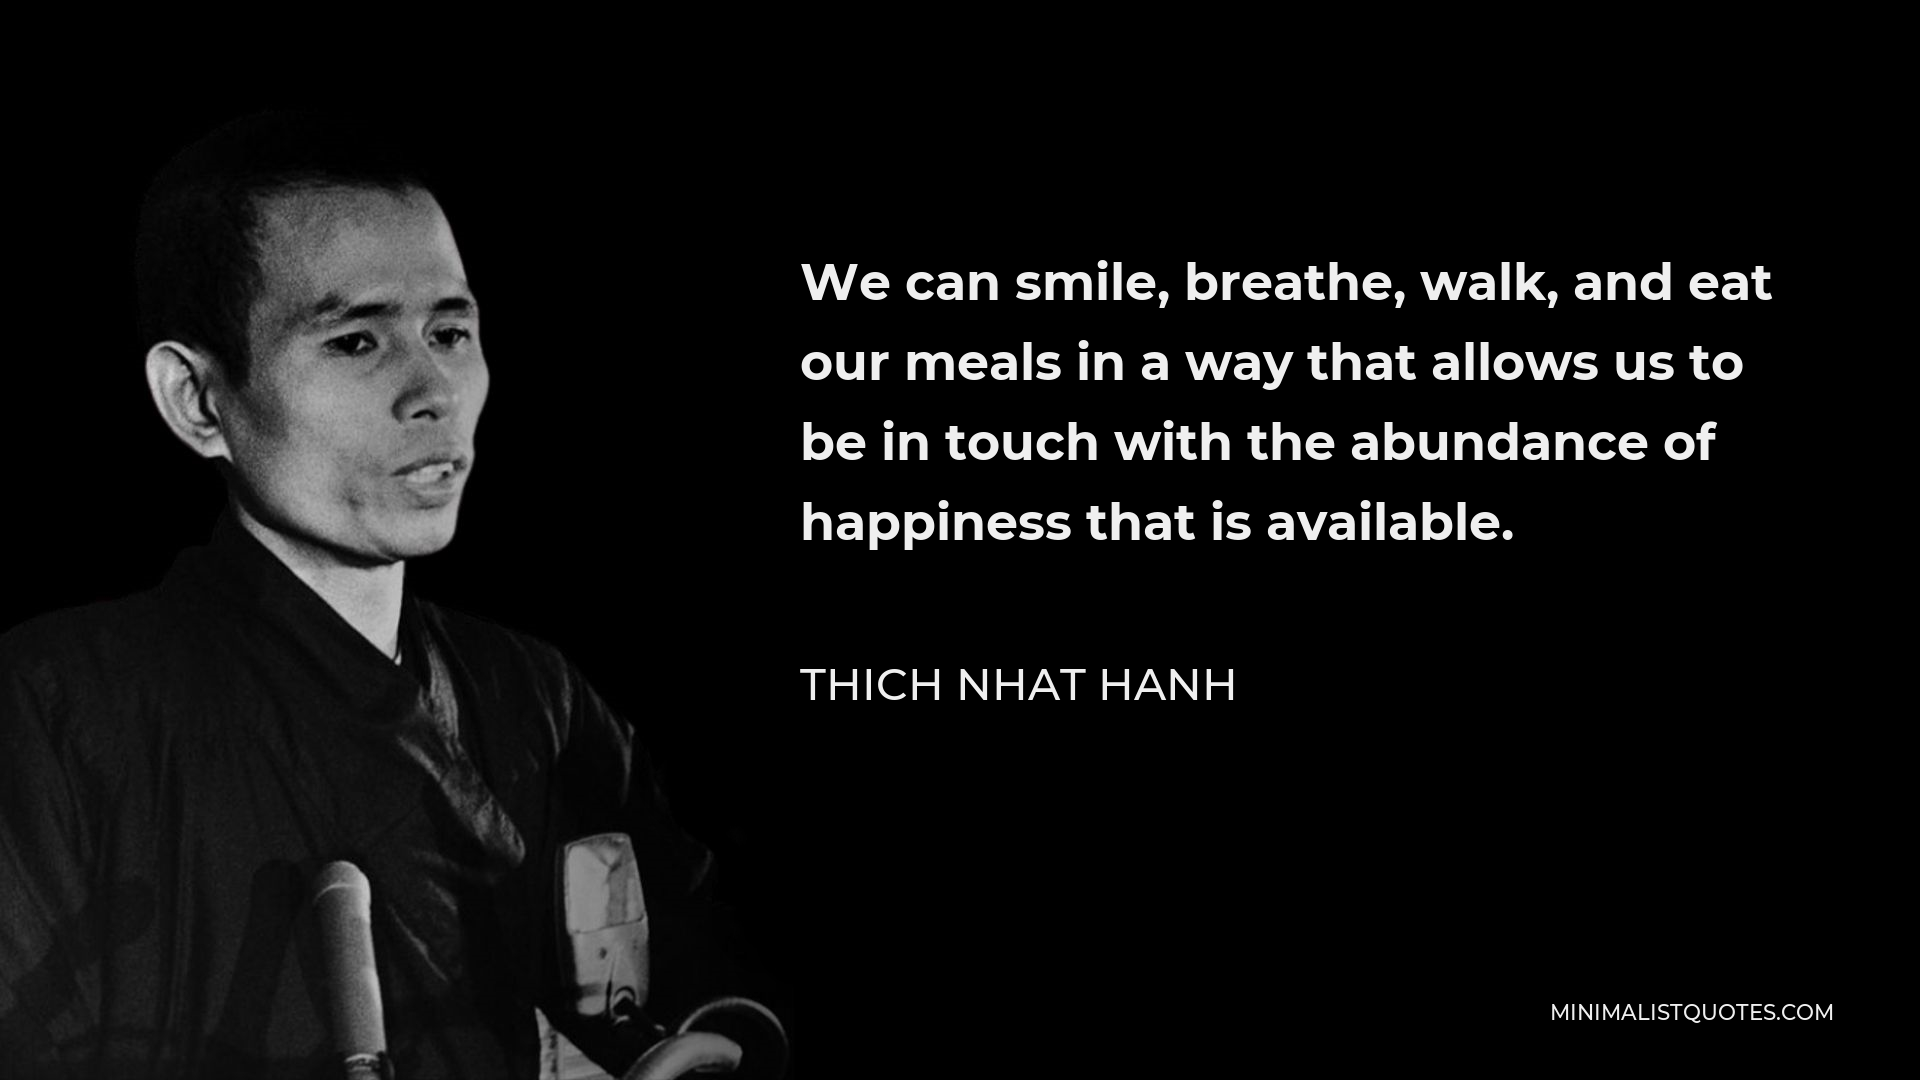 Thich Nhat Hanh Quote - We can smile, breathe, walk, and eat our meals in a way that allows us to be in touch with the abundance of happiness that is available.